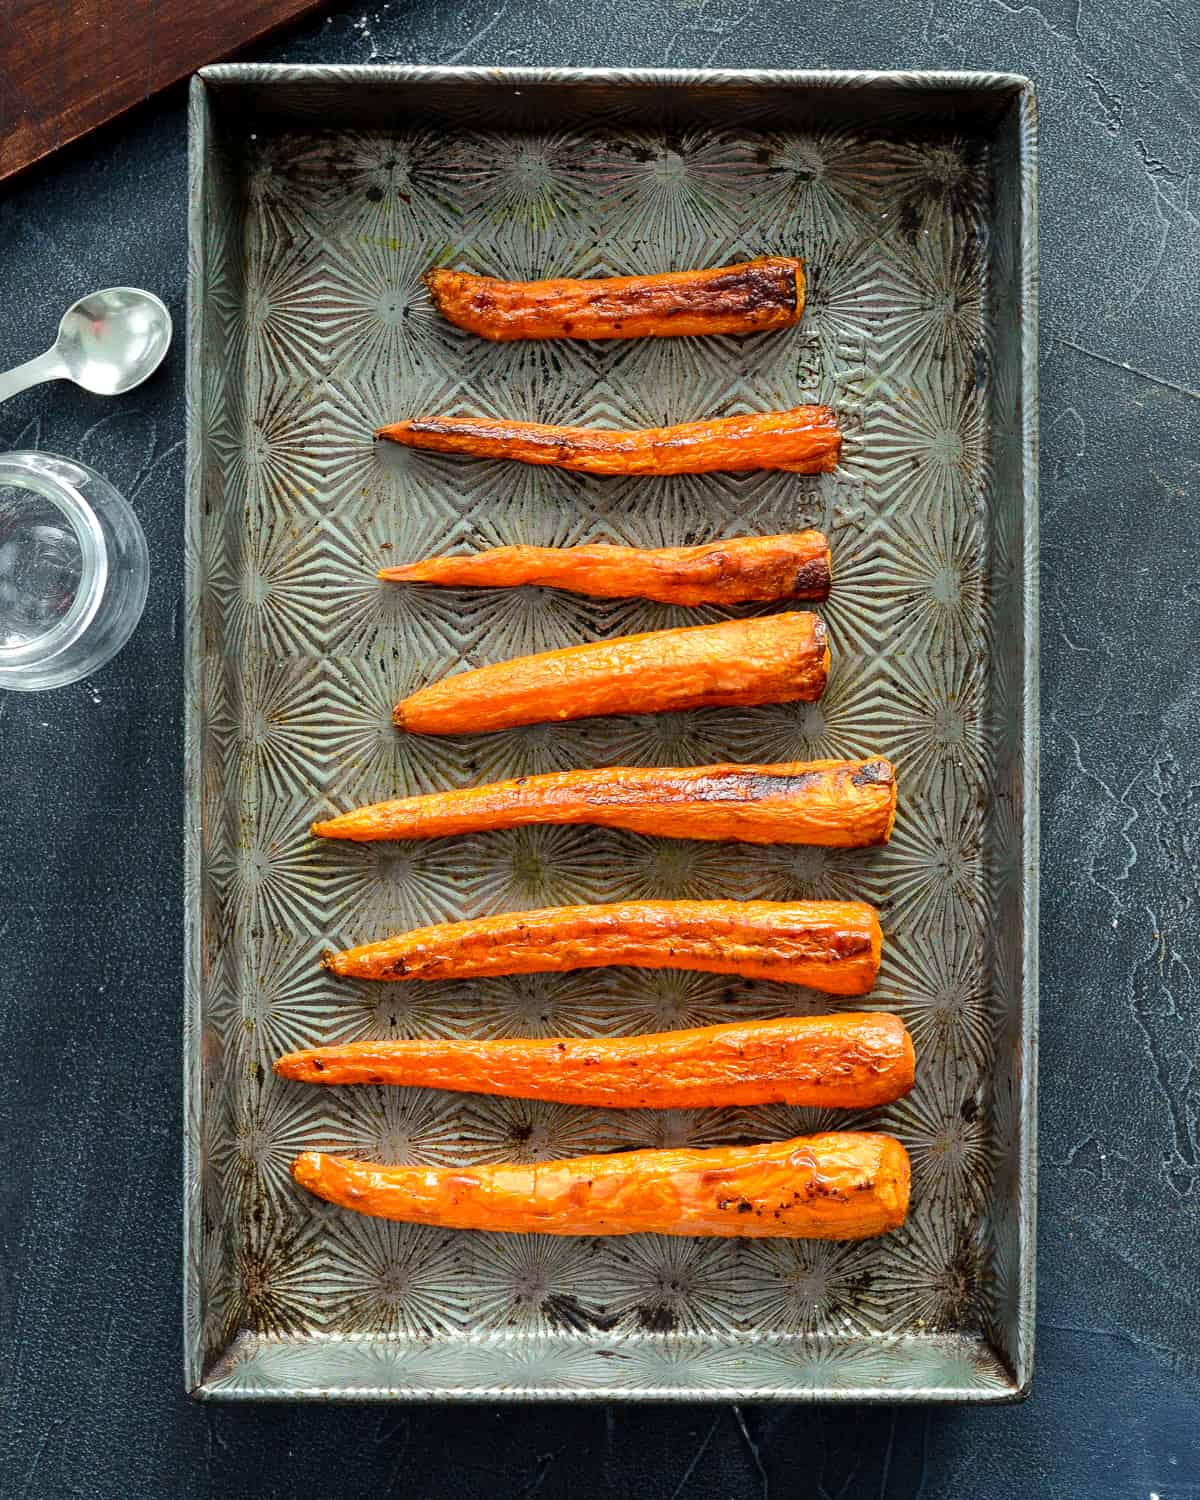 Overhead view of a pan of roasted carrots with a glass baby food jar and spoon next to it in the making of homemade baby food carrots